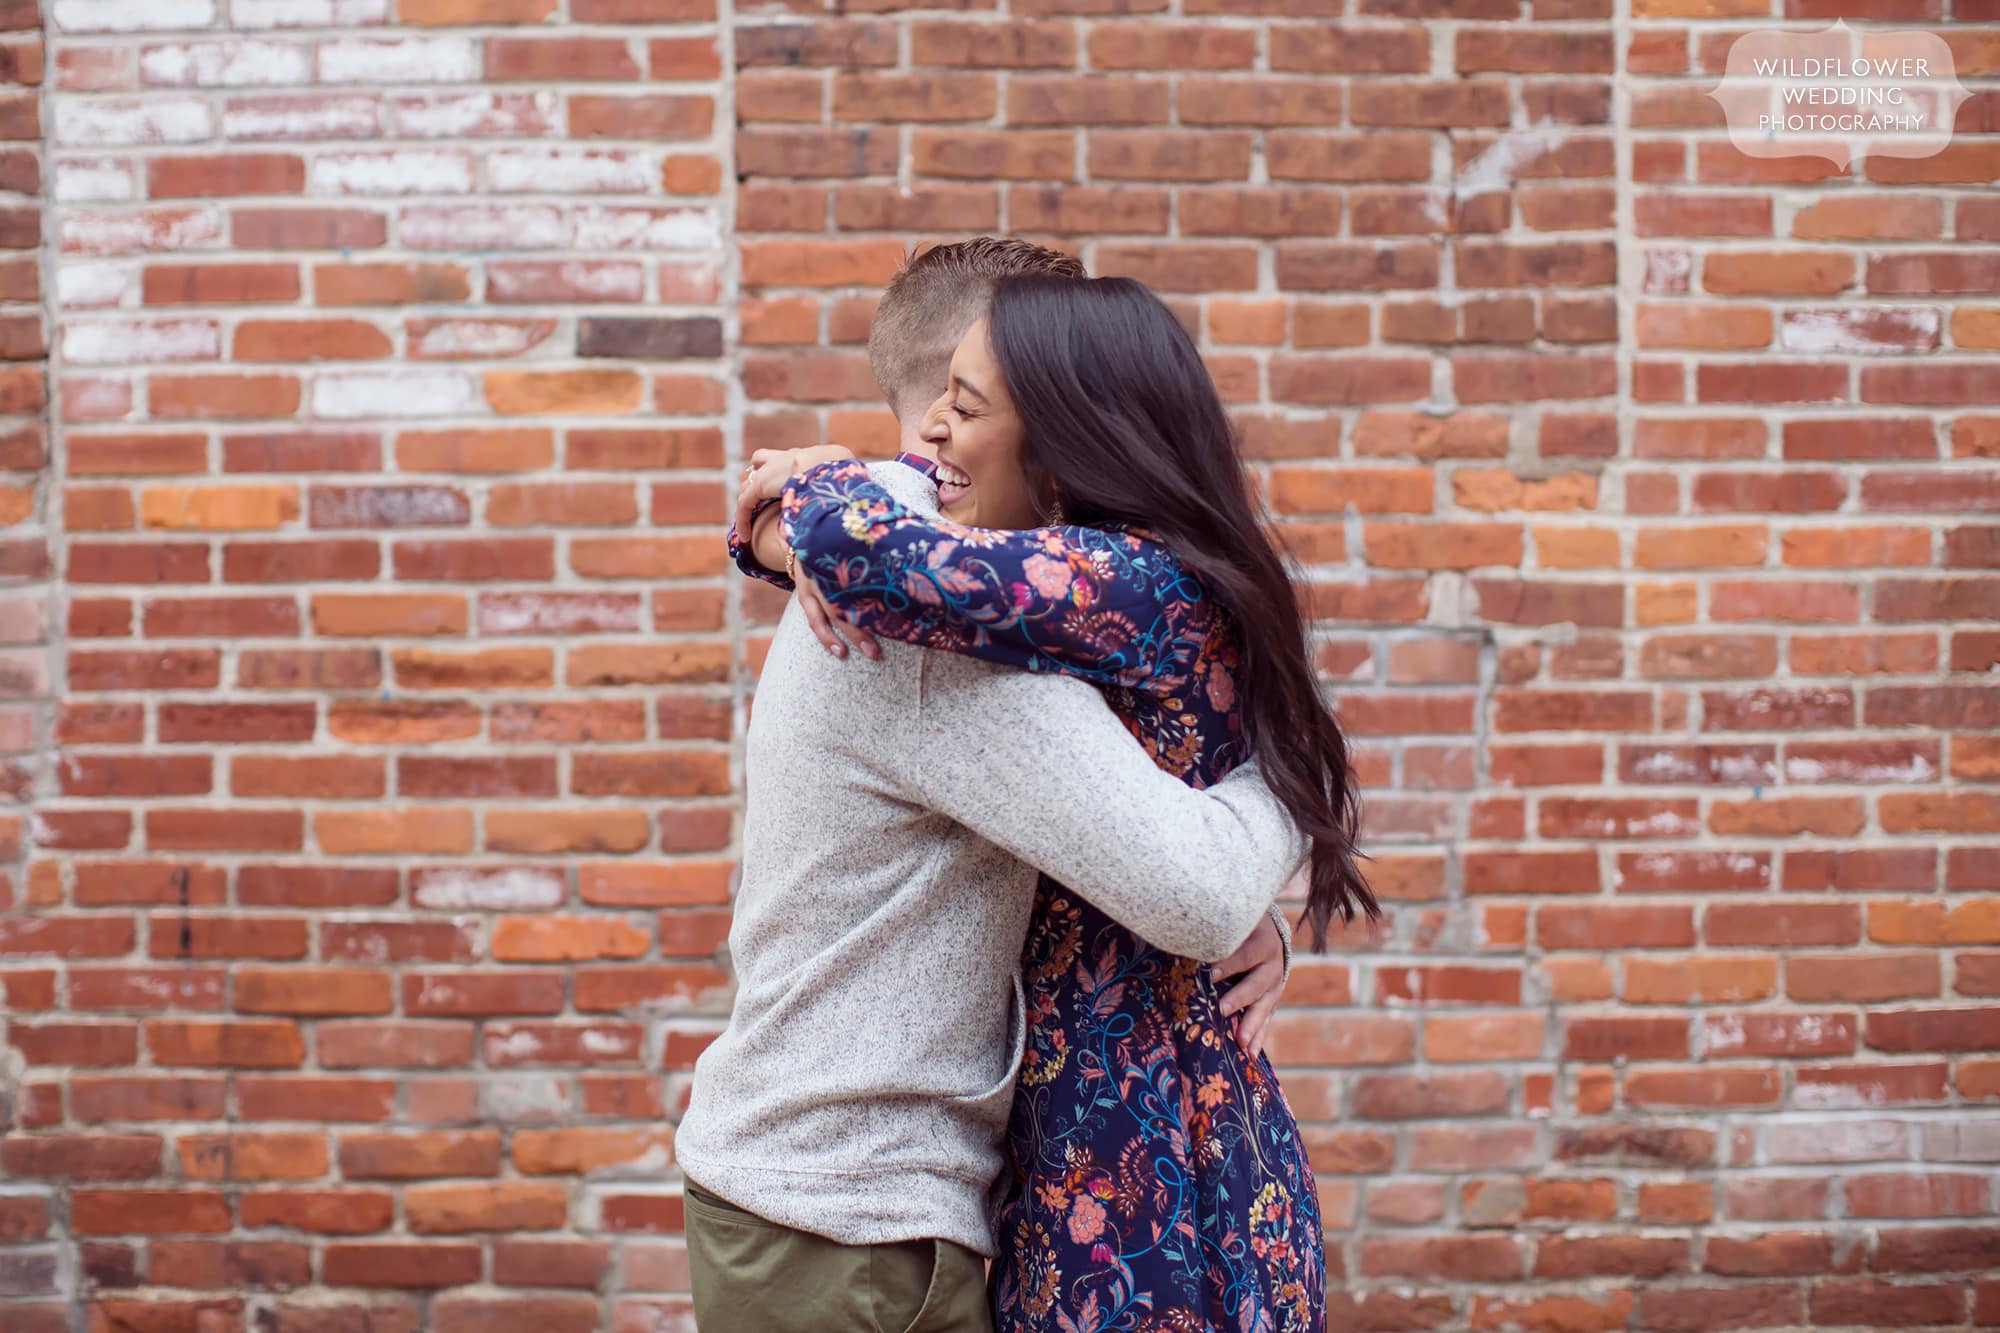 Natural photos of engaged couple with brick wall behind them in Columbia, MO near MU.